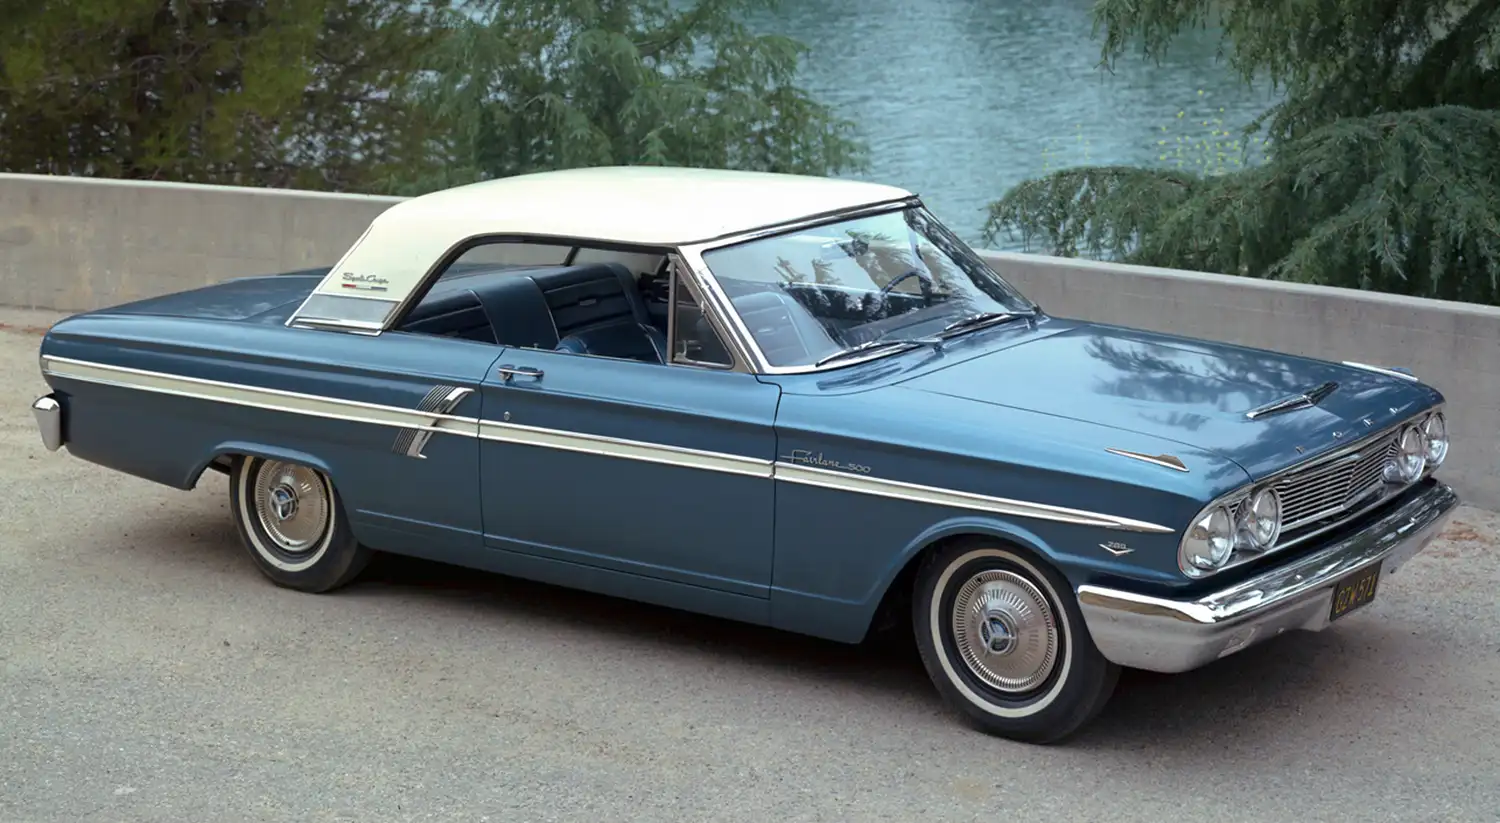 1964 Ford Fairlane 500 Sports Coupe: A Classic Blend of Style and Performance